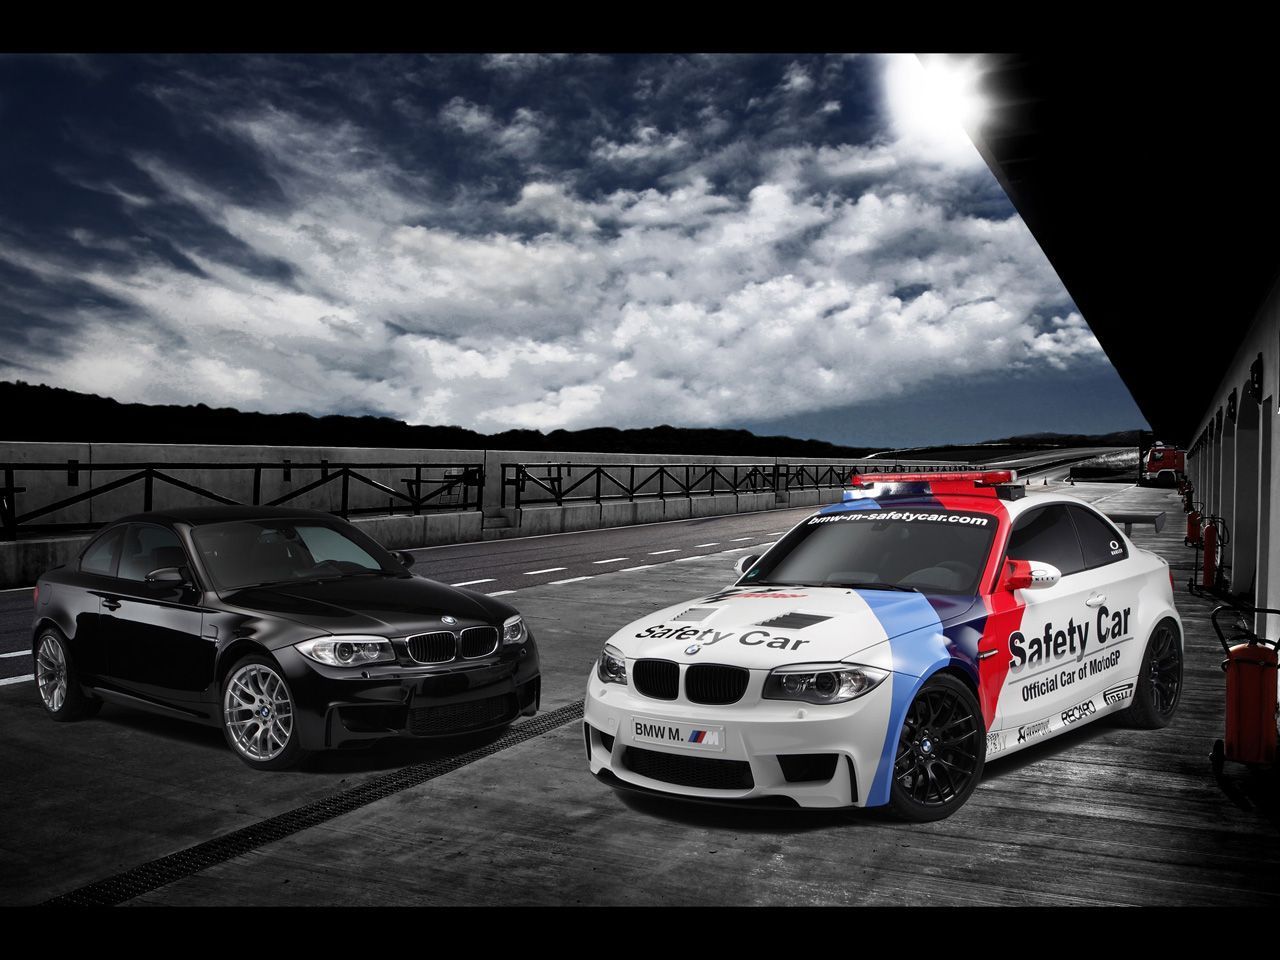 The Ultimate Track Ready Car: The 2011 BMW 1 Series M Coupe MotoGP Safety Car